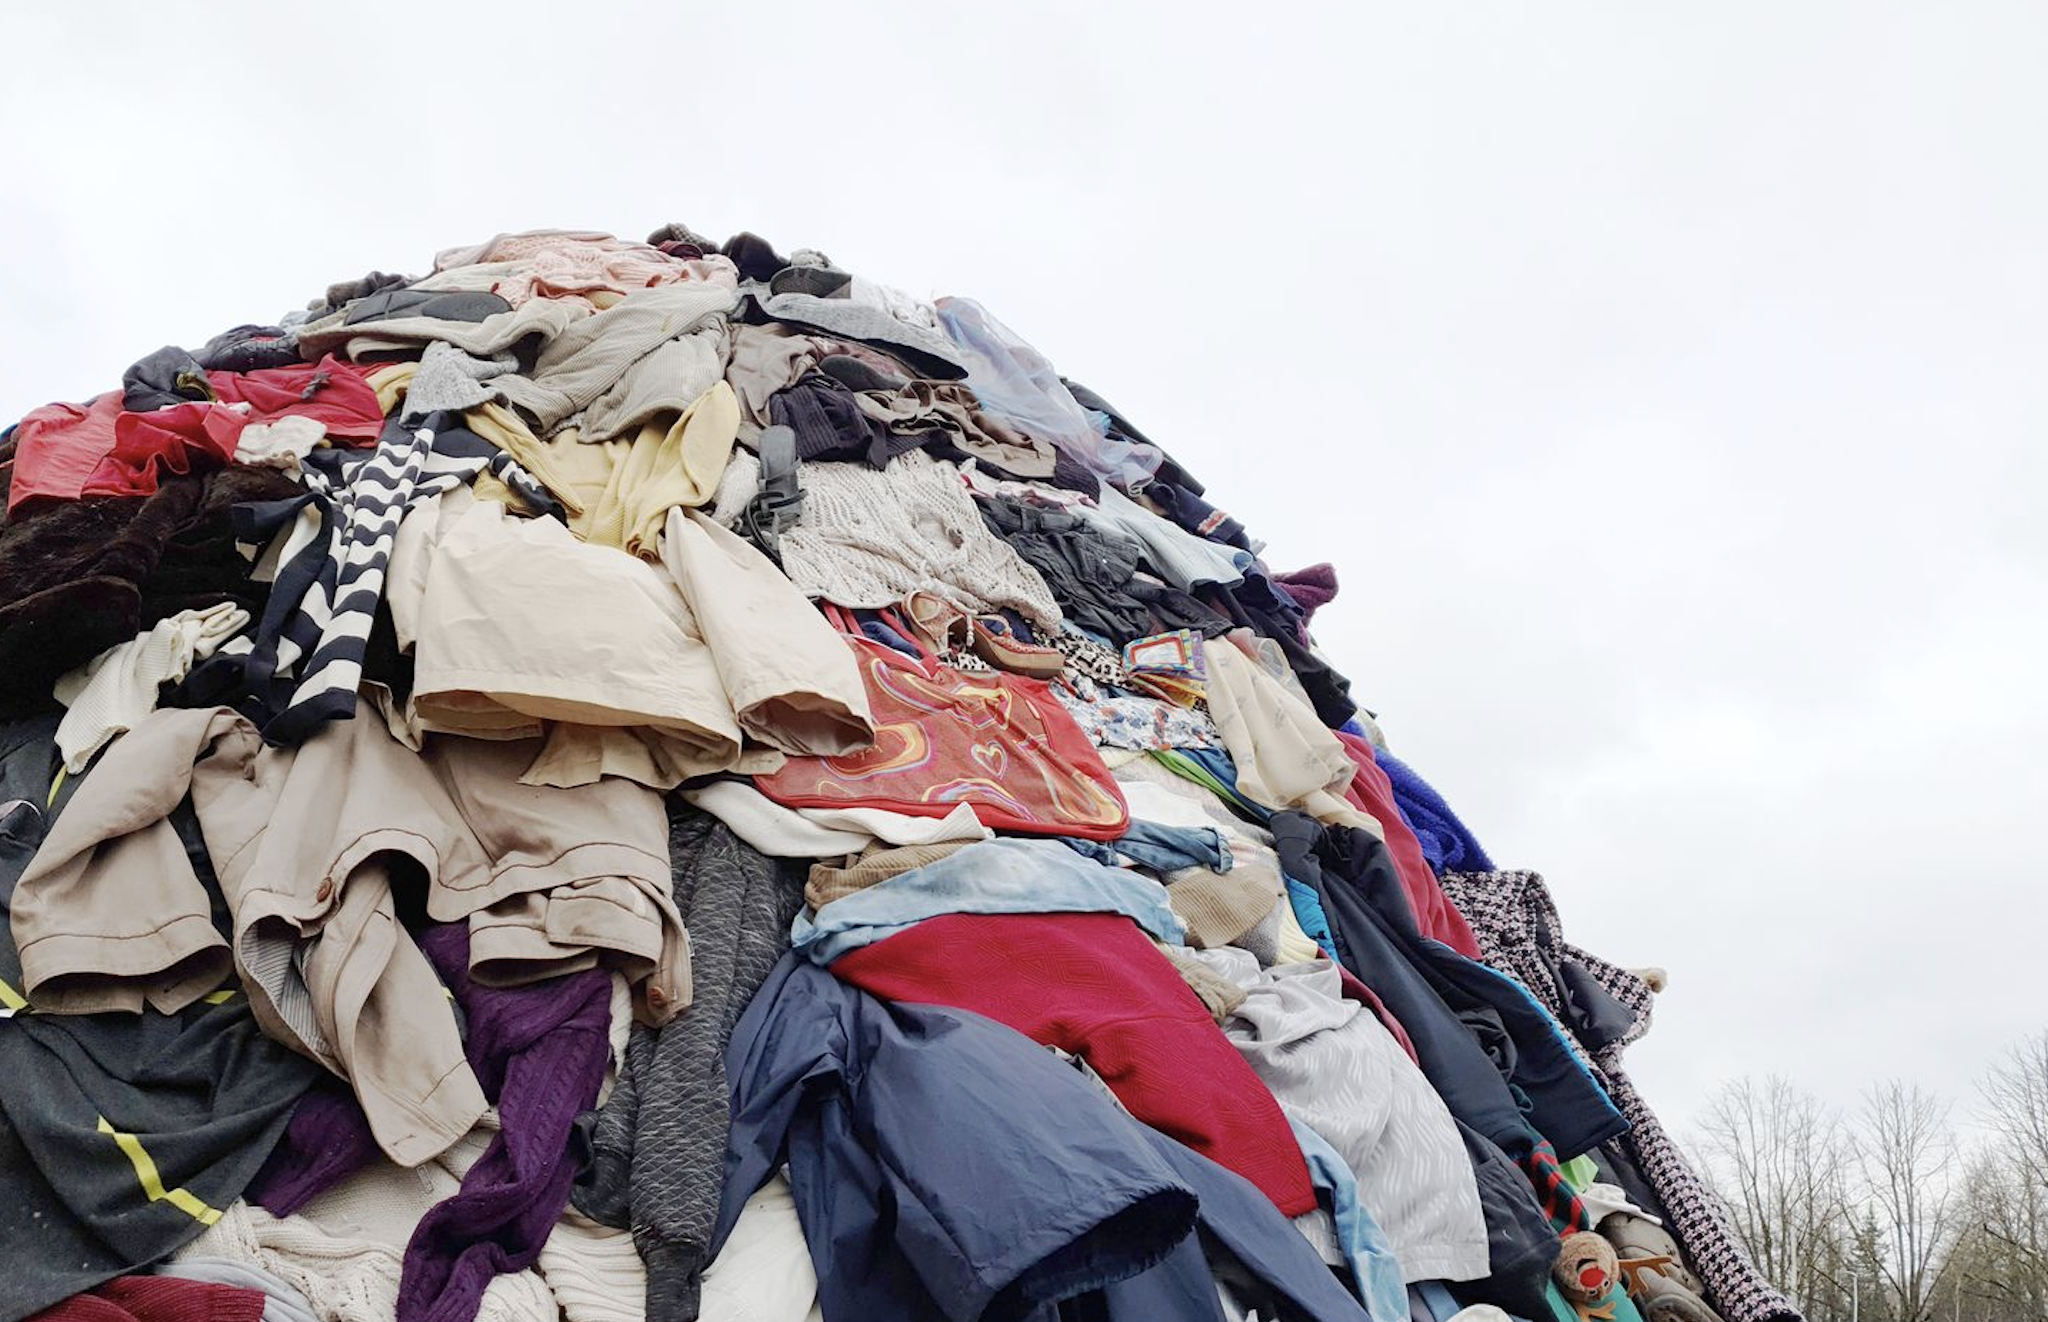 Fashion Faux Pas and an innovative recycling solution for clothing winding up in landfills